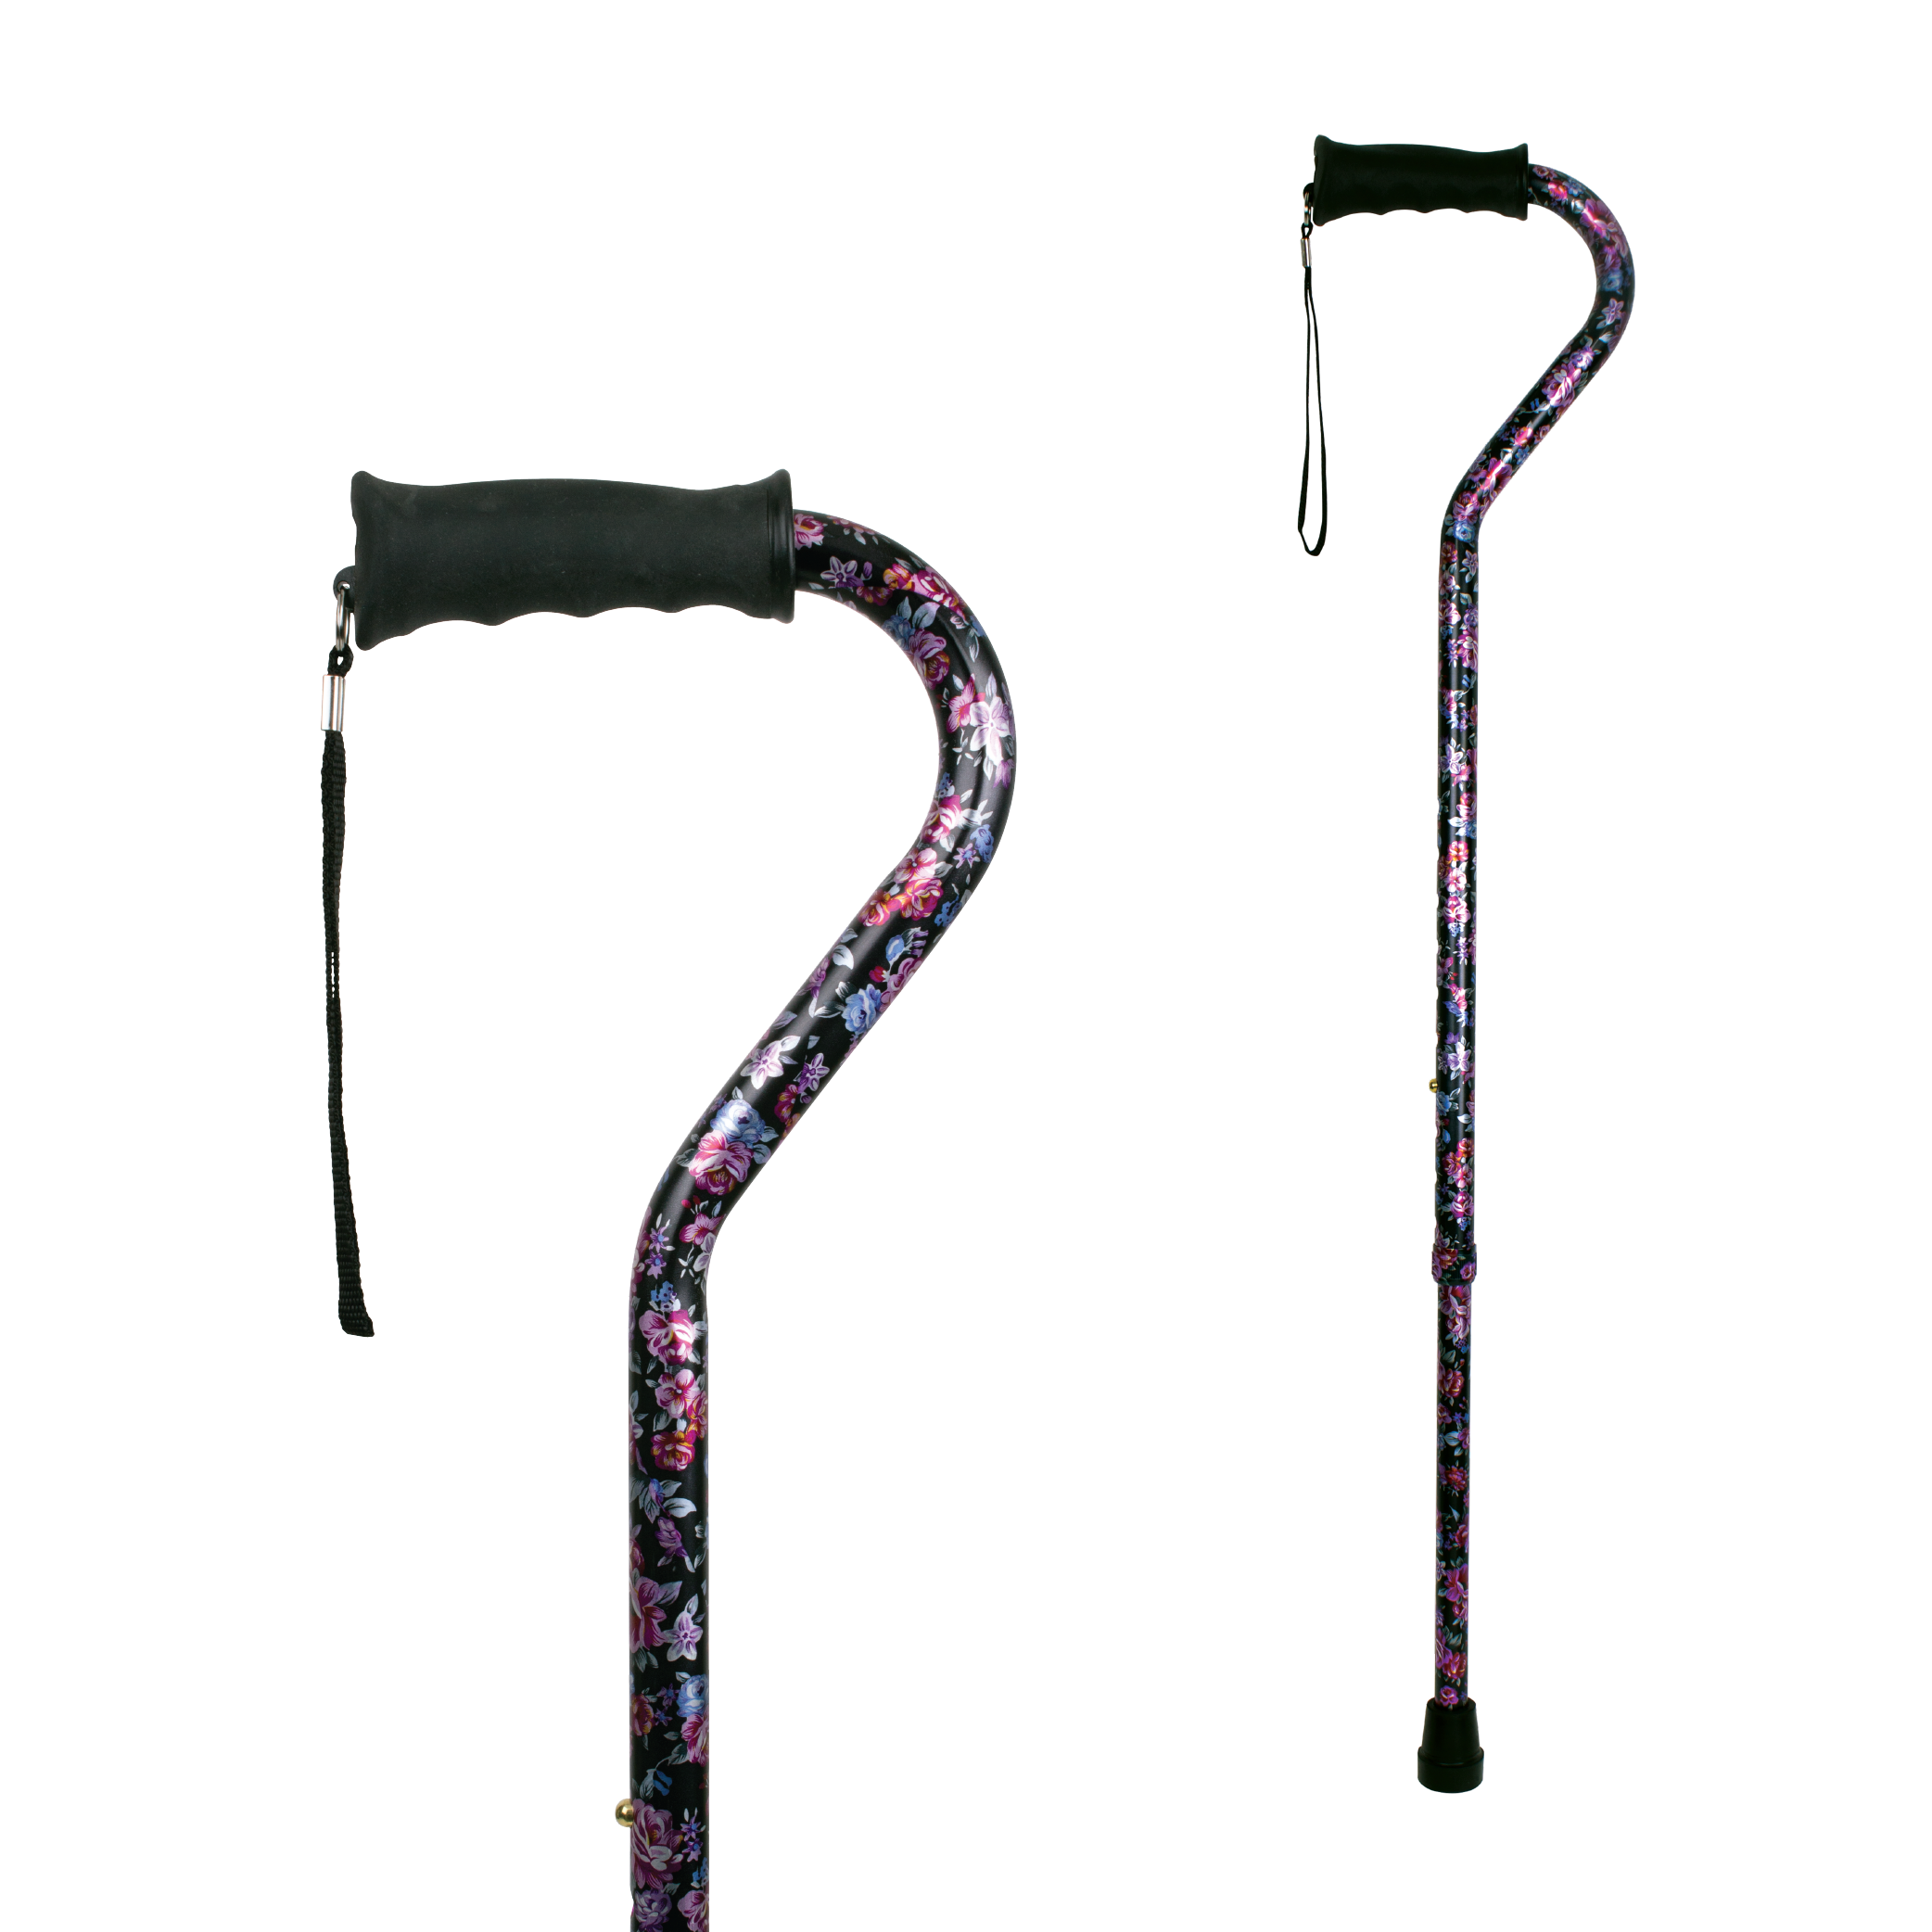 Carex Ergo Adjustable Offset Walking Cane for all Occasions, Black Flower, 250 lb Weight Capacity - image 1 of 10